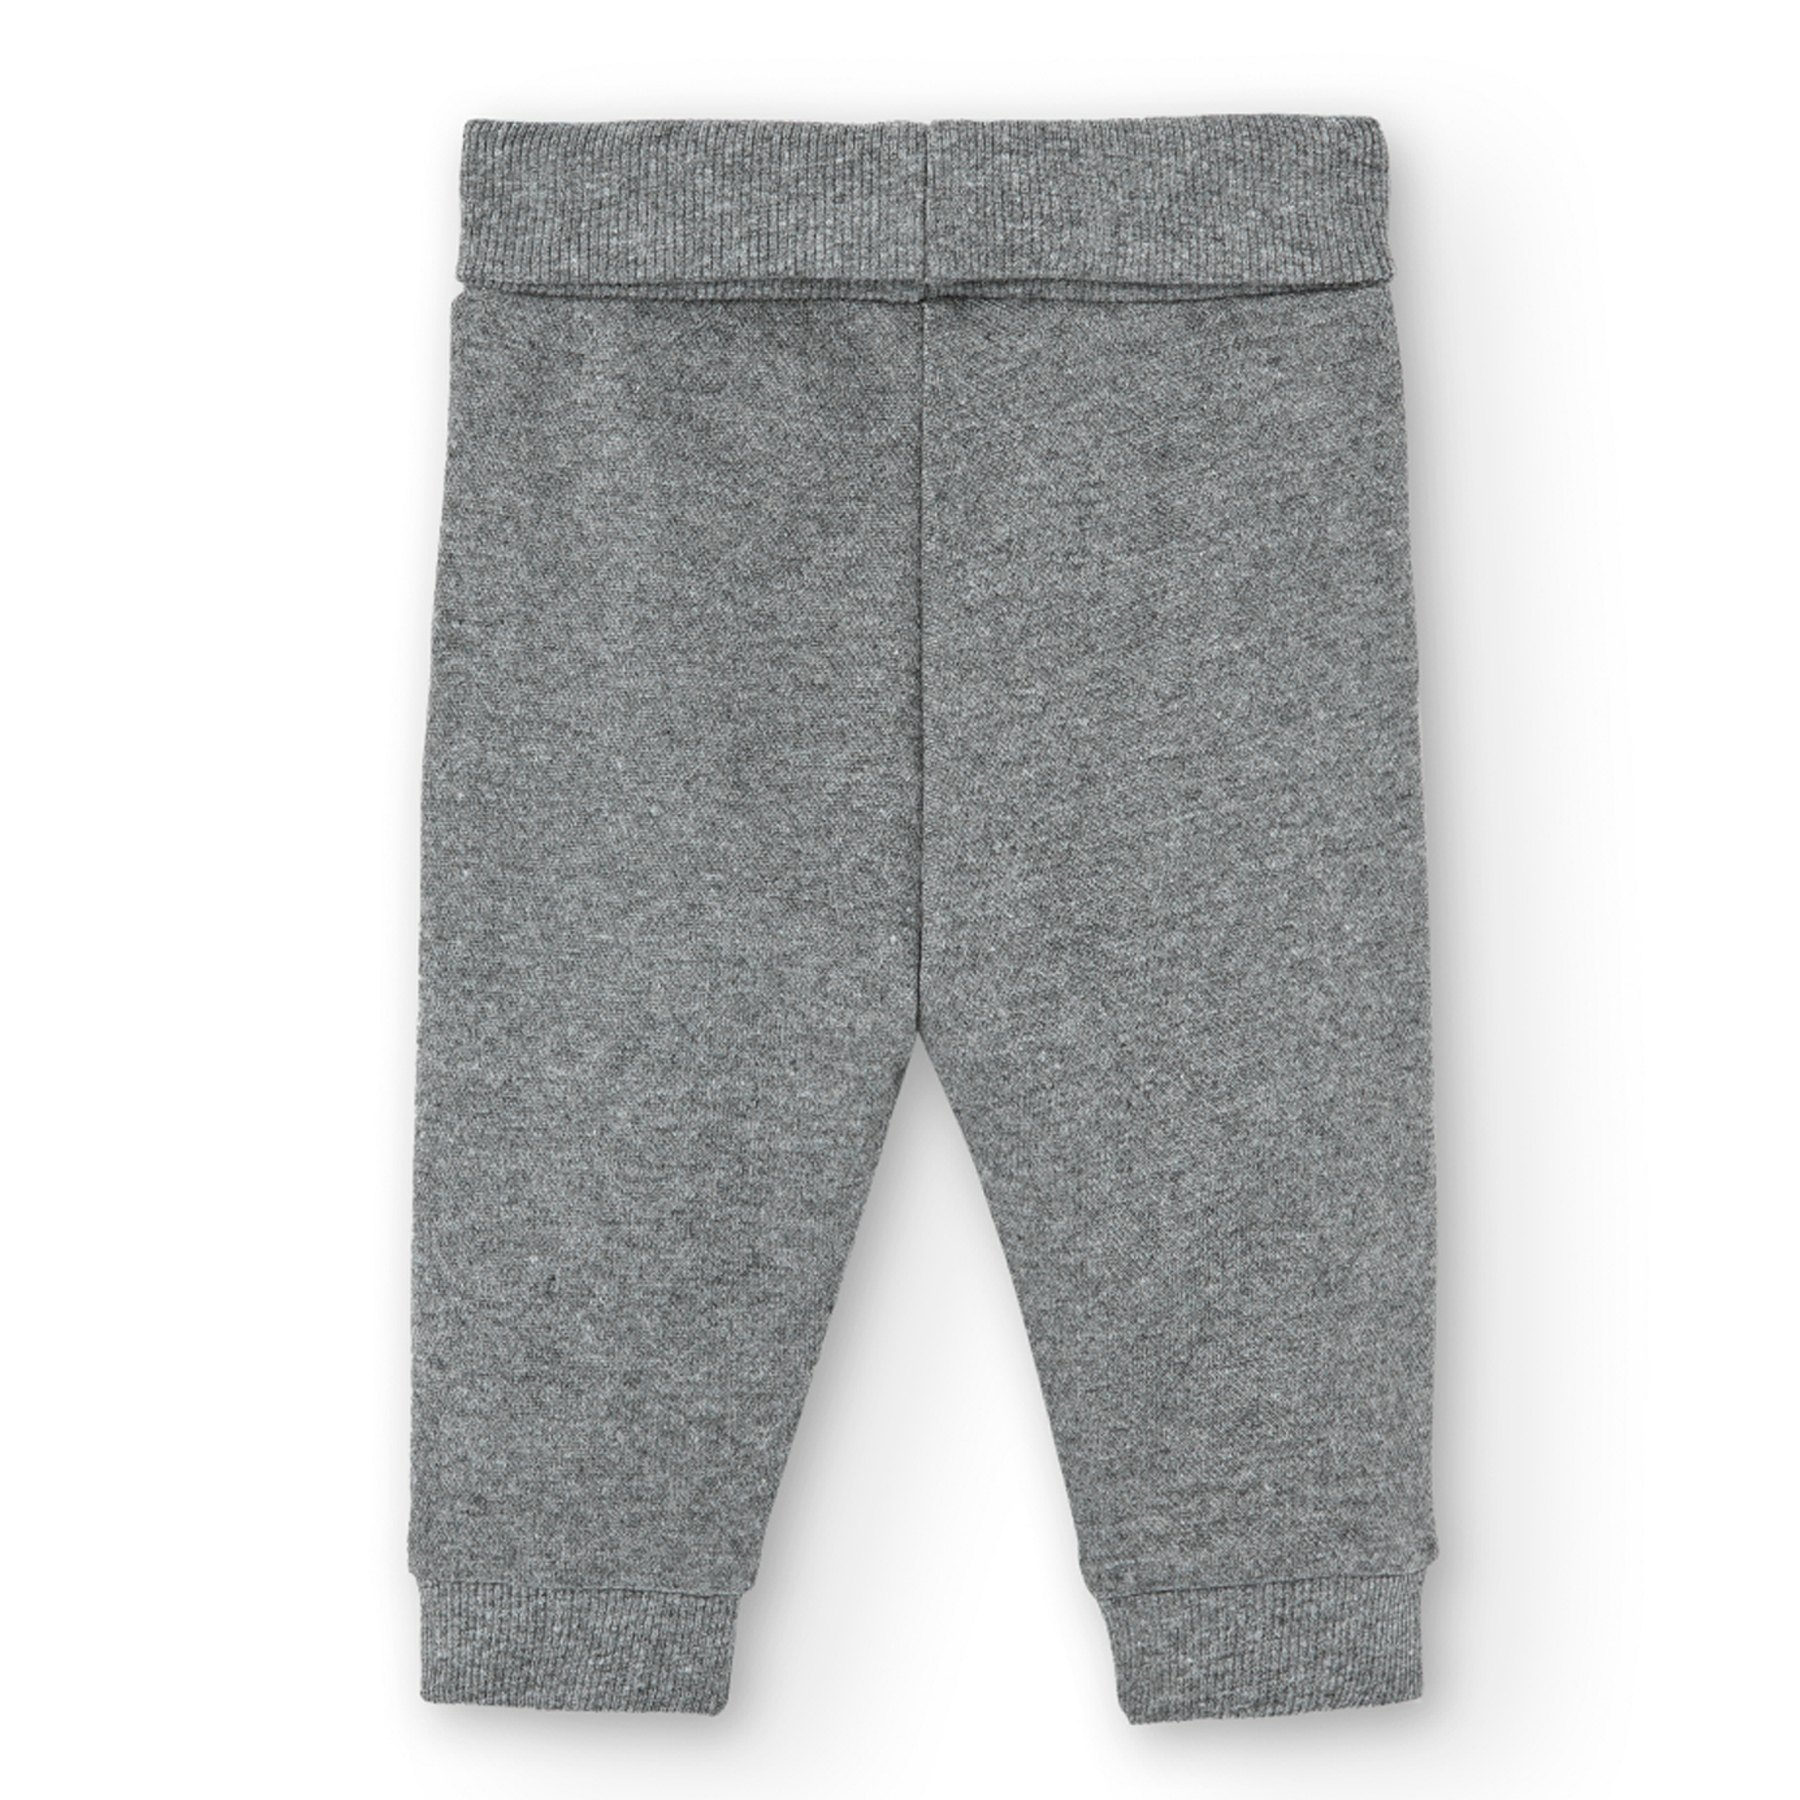 Grey knit trousers 2